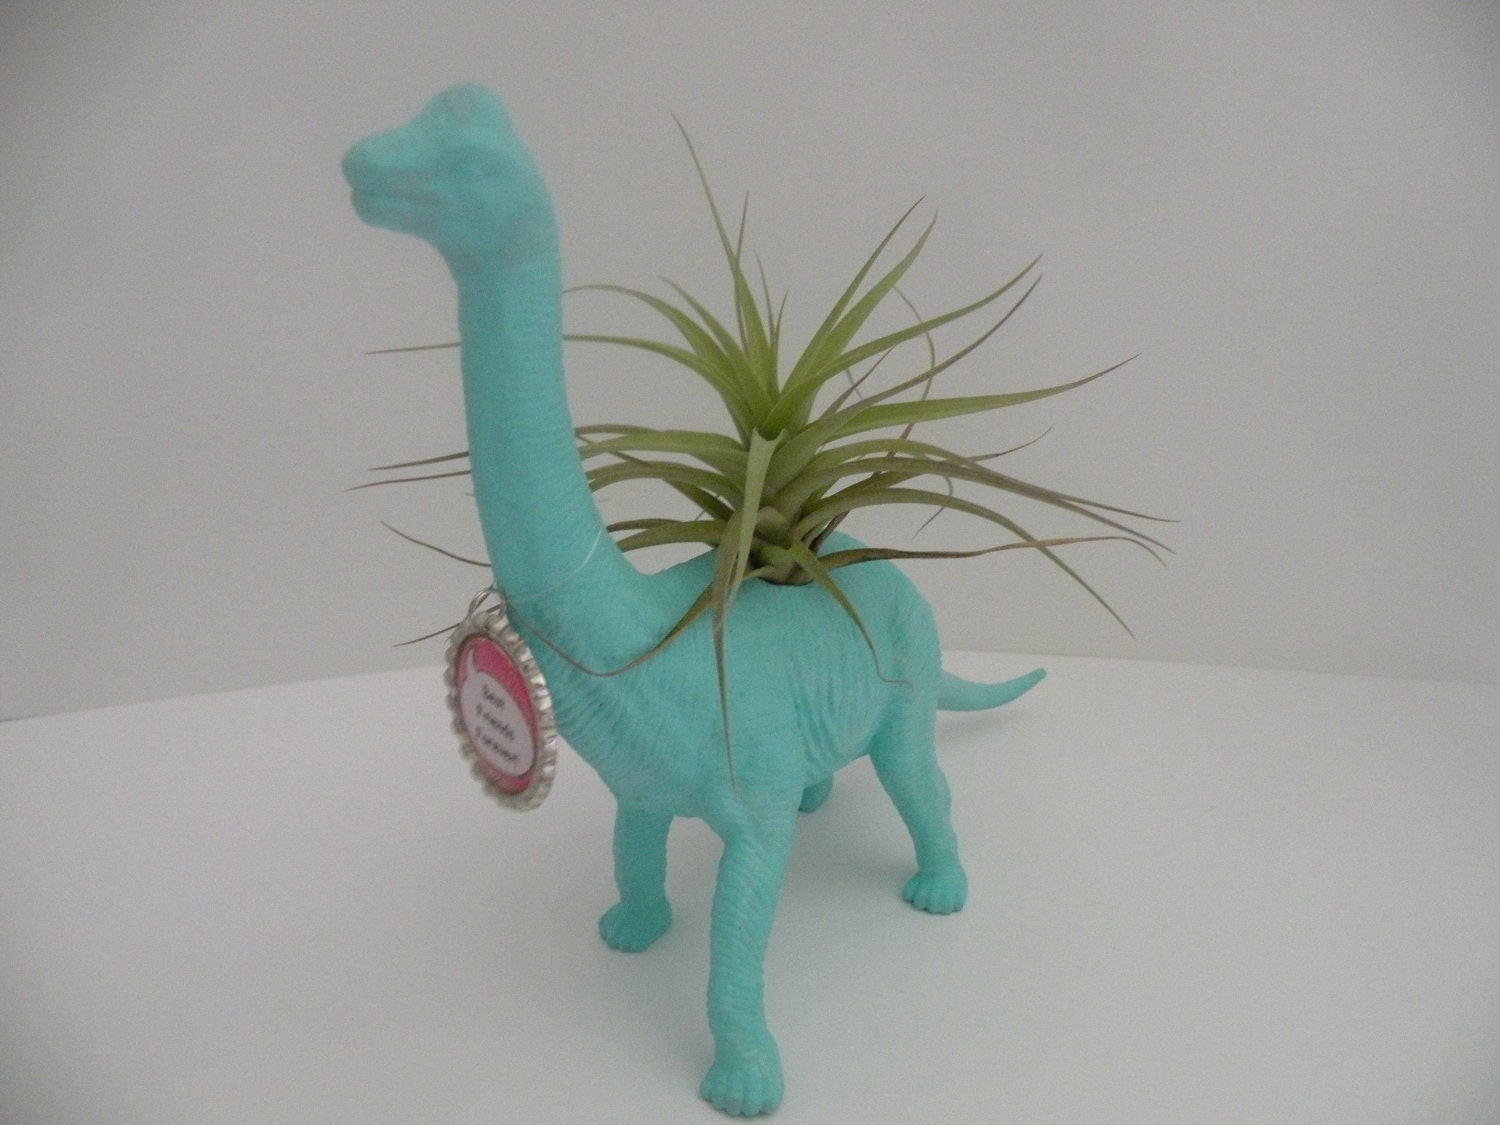 Dinosaur planter with air plant and personalized bottlecap. College dorm or kids room decoration.